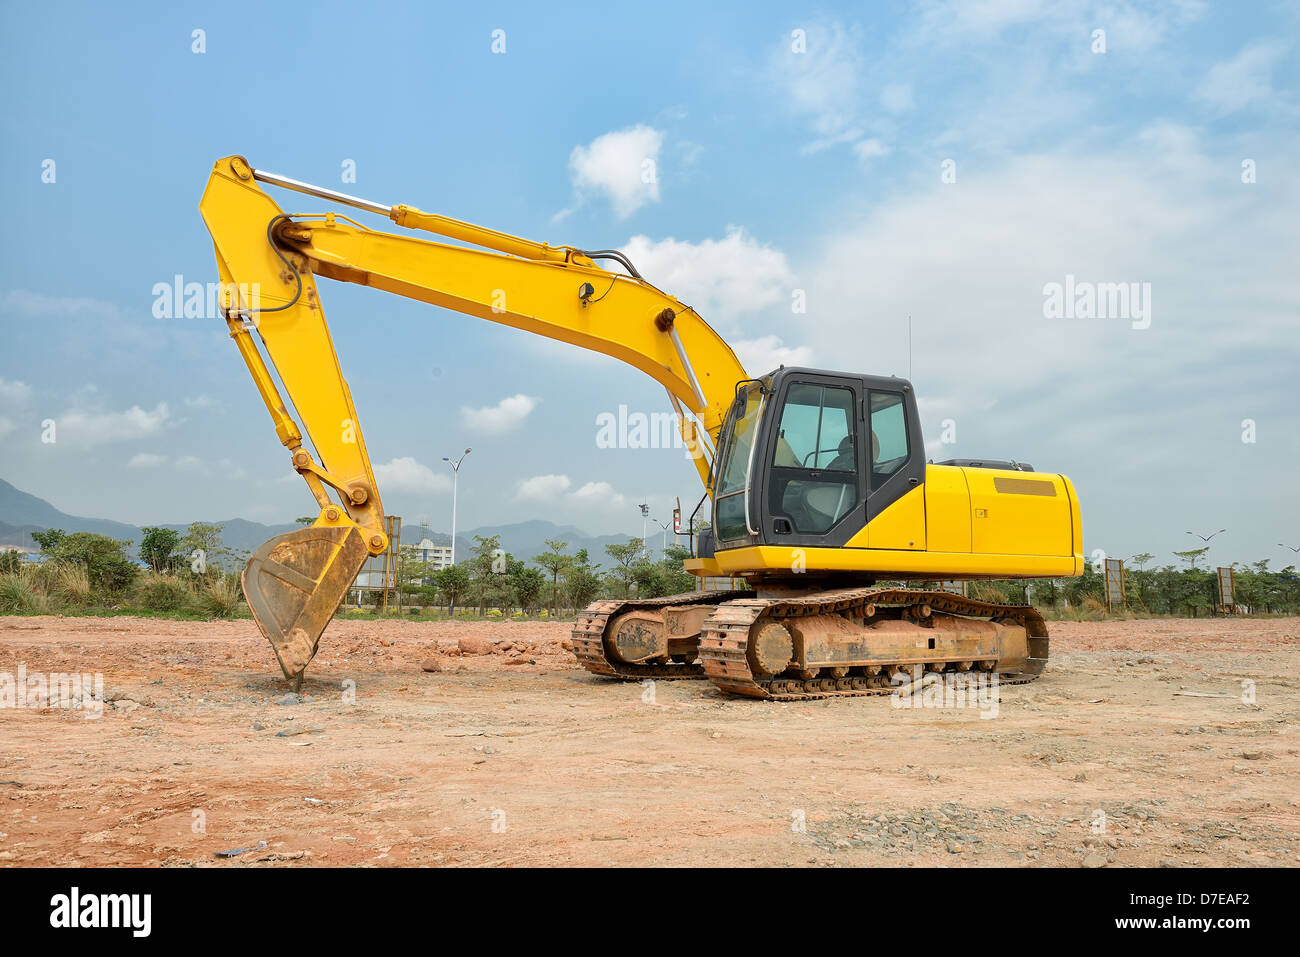 excavator loader machine during earthmoving works outdoors Stock Photo